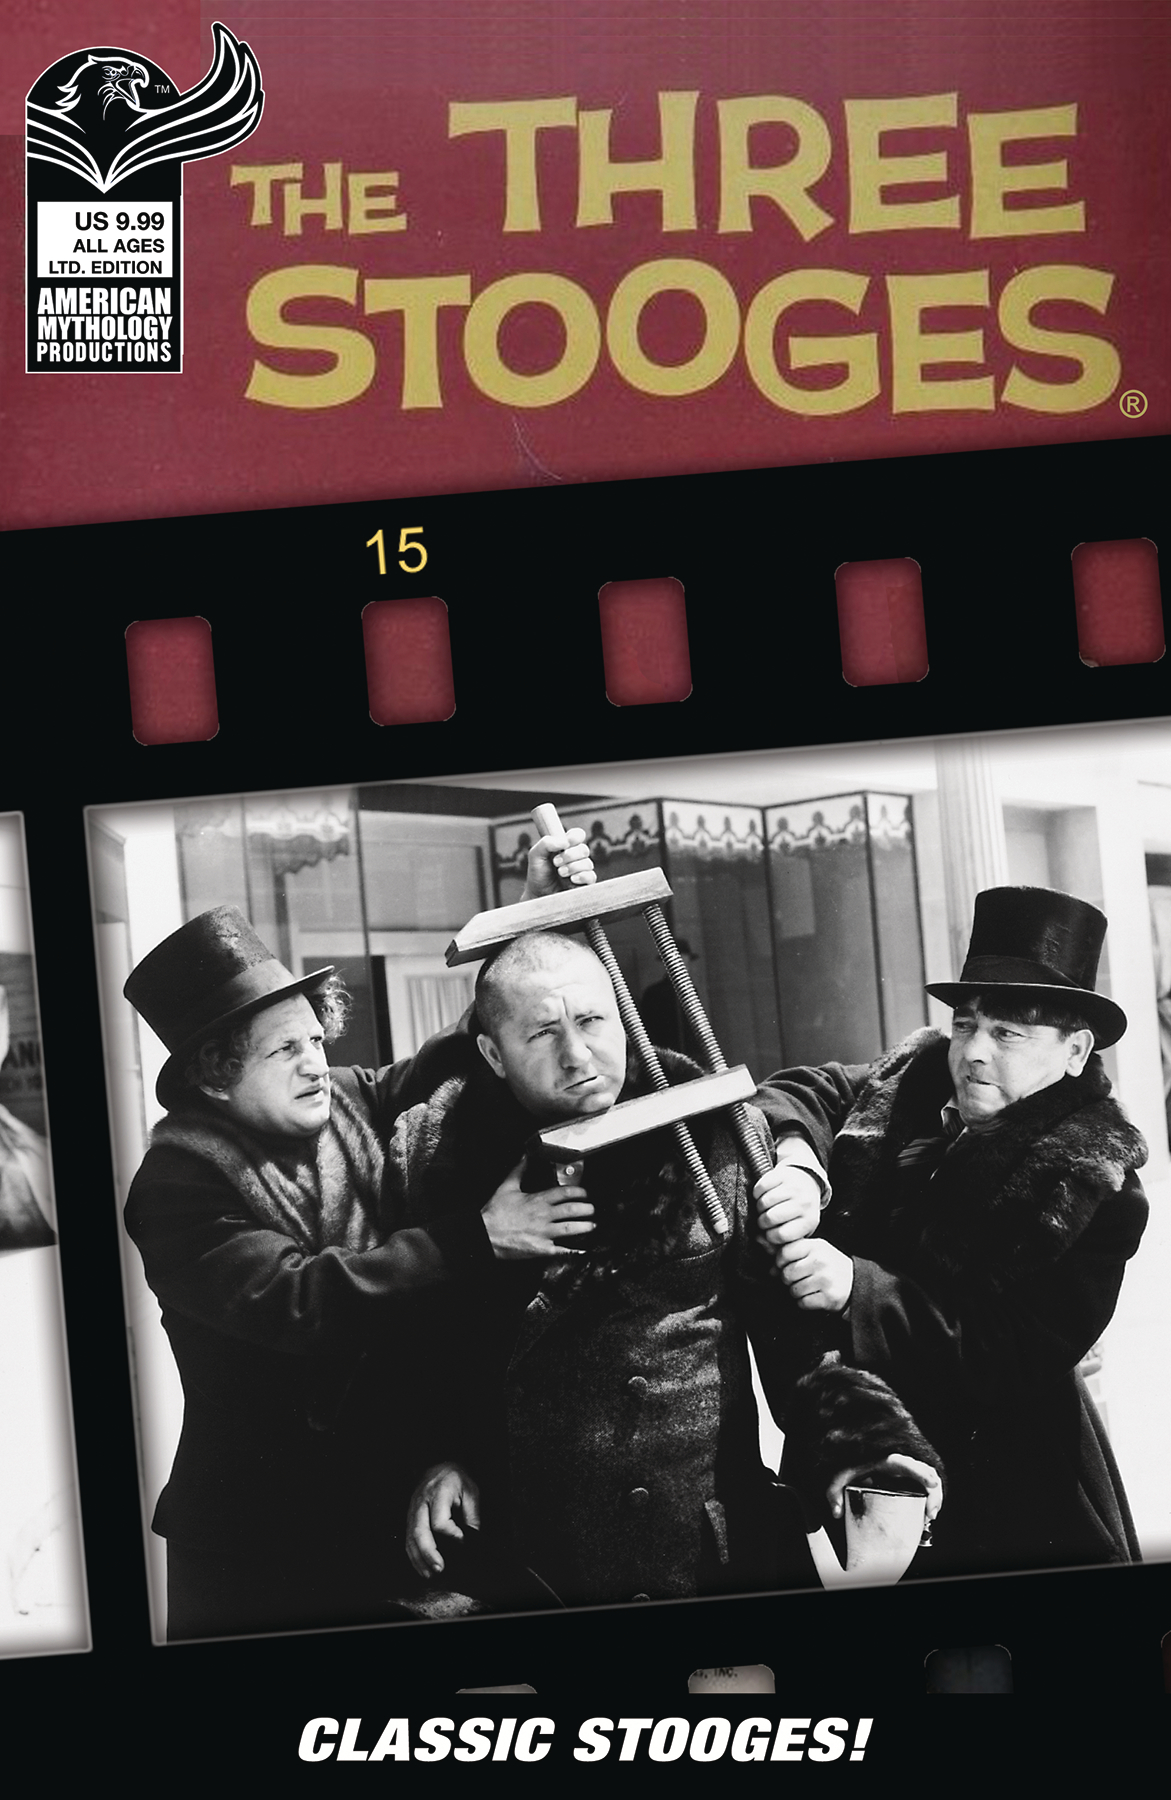 Am Archives The Three Stooges Gold Key First #1 Cover B Clasic Photo 350 Copy Limited Edition